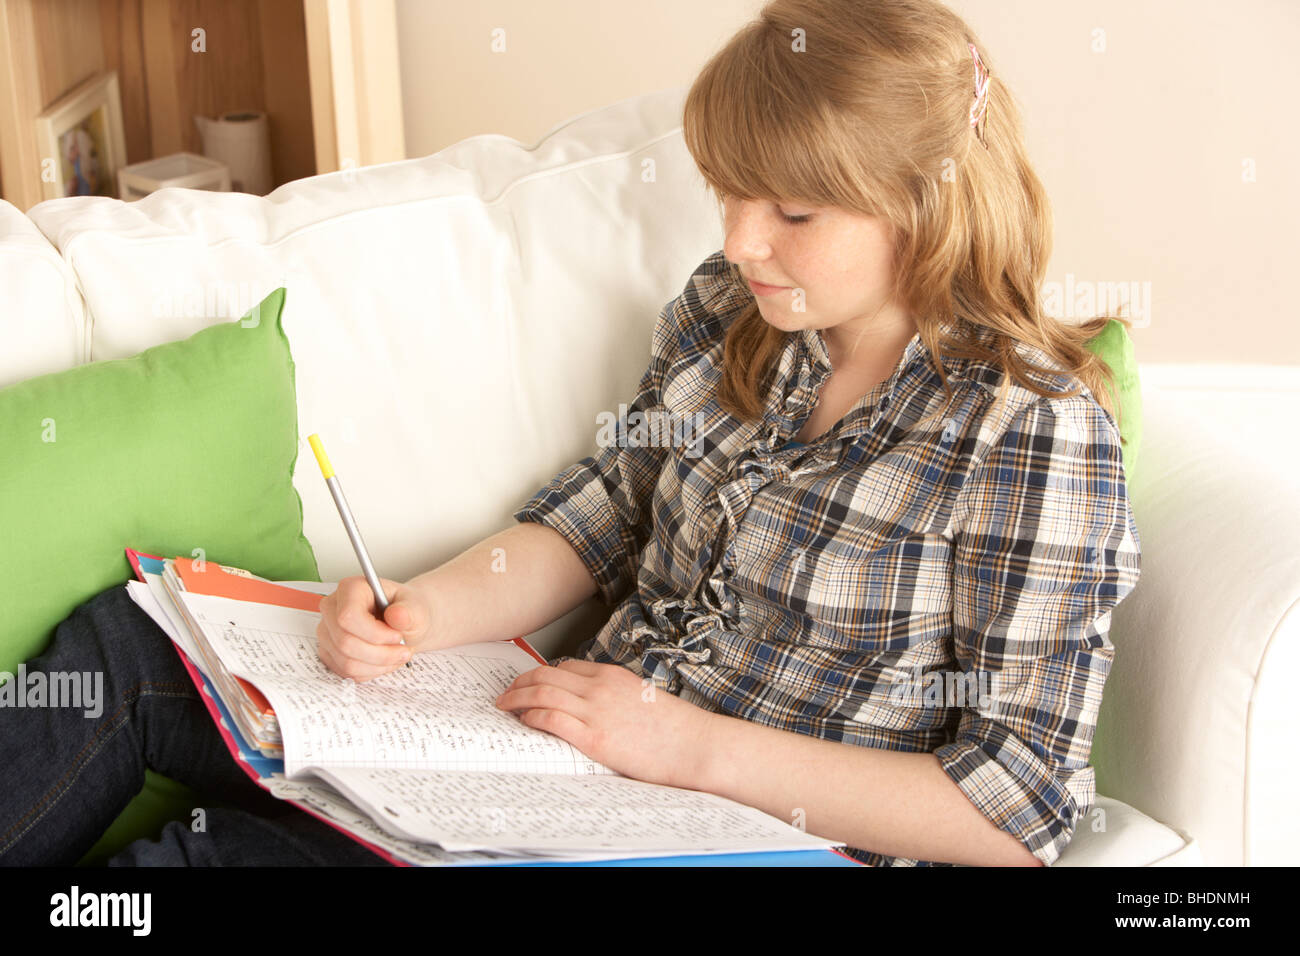 Teenage Girl studying at home sitting on Sofa Banque D'Images